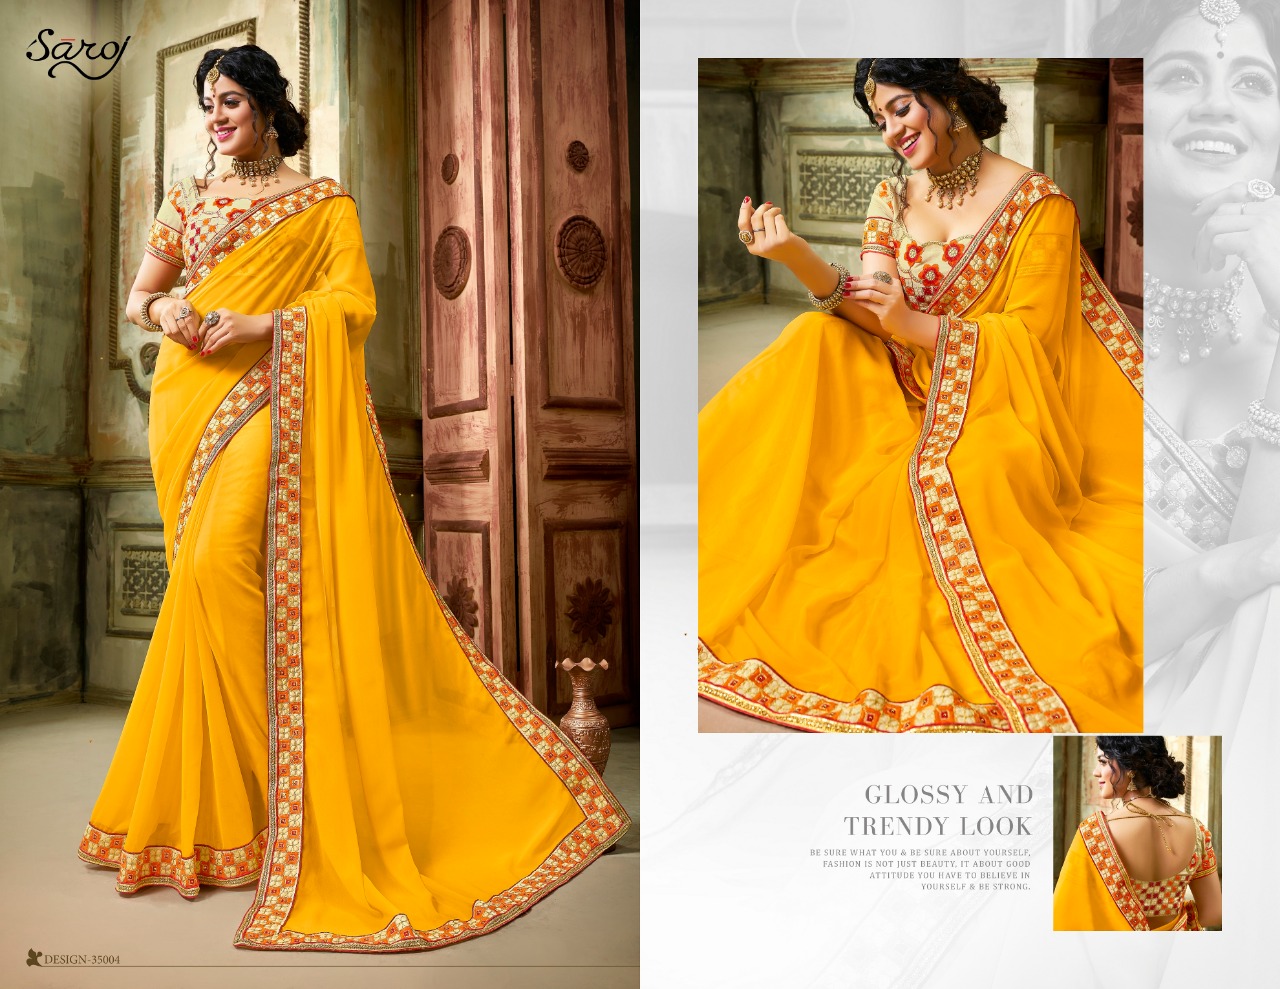 Saroj launch anjali exclusivw heavy traditional collection of sarees